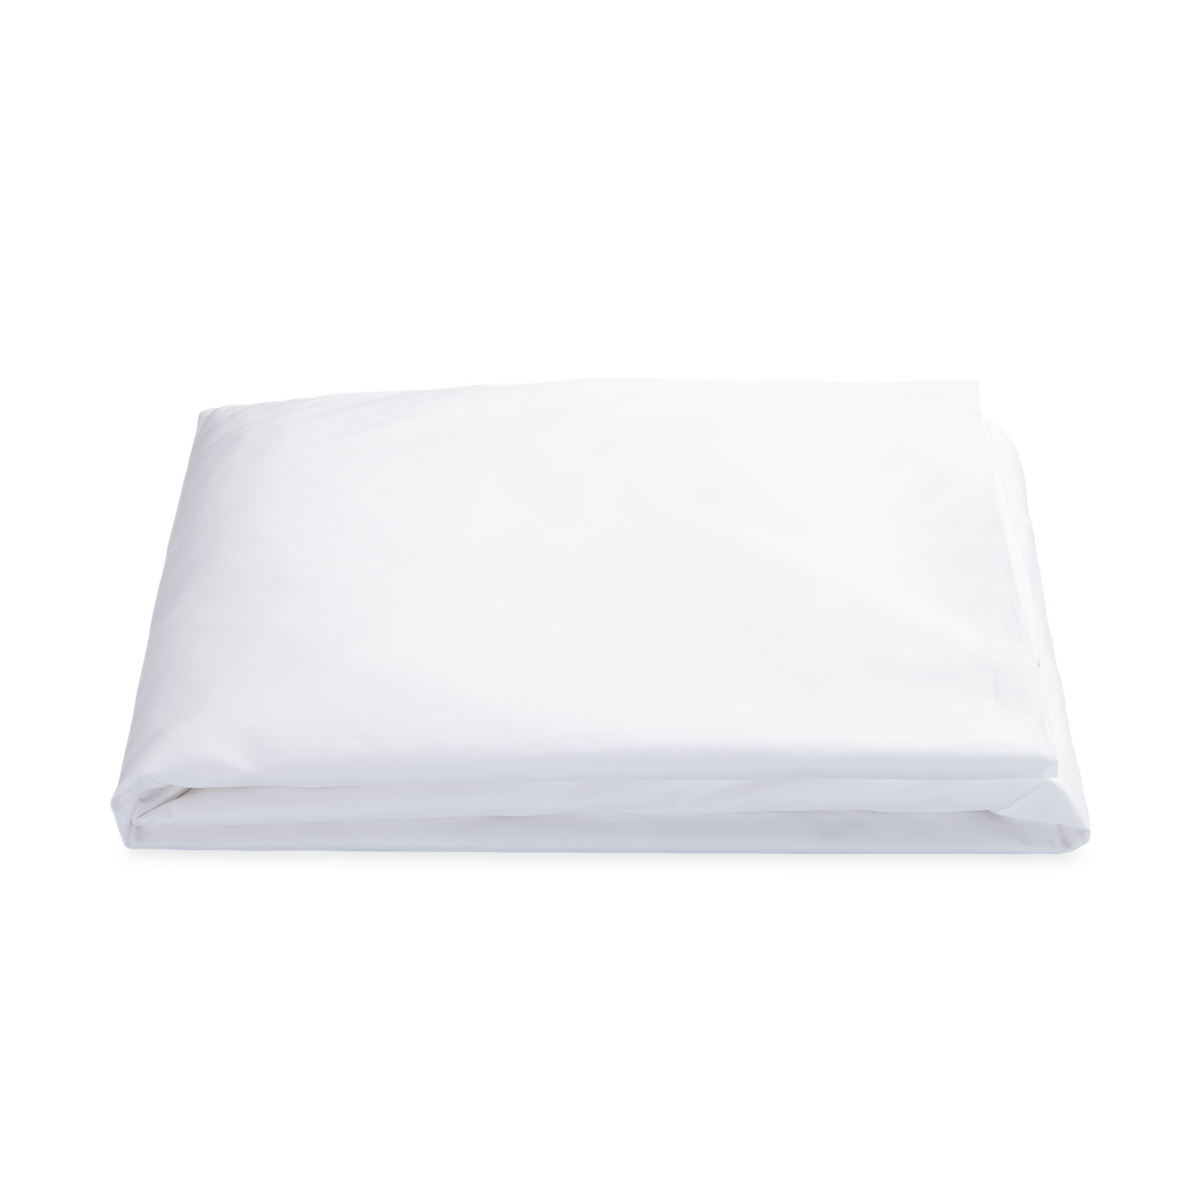 Fitted Sheets of Matouk Gatsby Bedding White Color